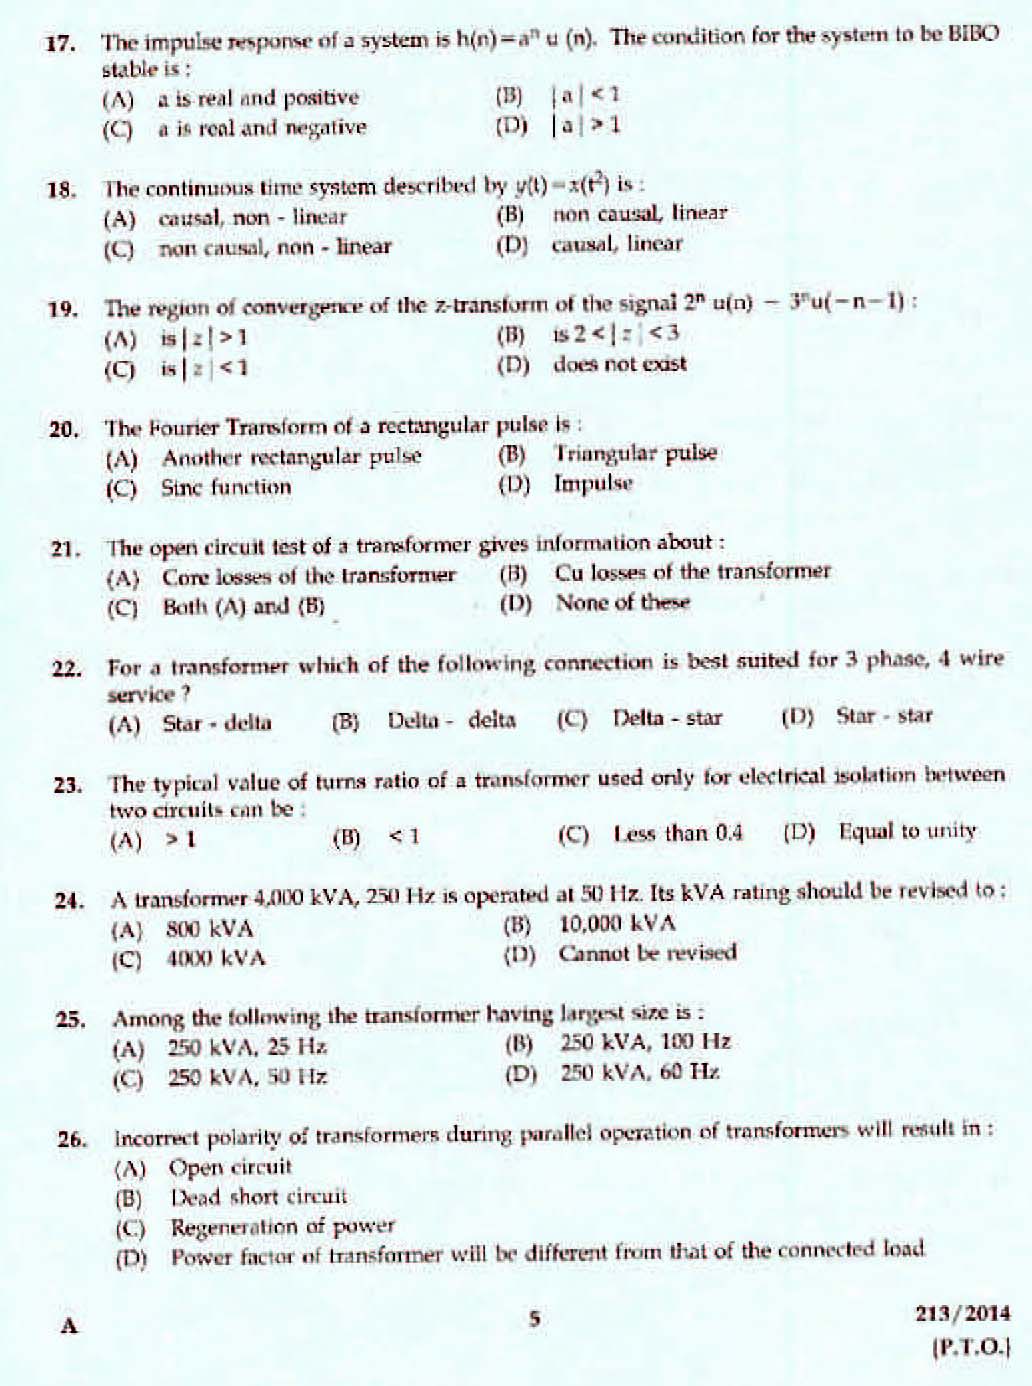 Kerala PSC Assistant Engineer Electrical Exam 2014 Question Paper Code 2132014 3